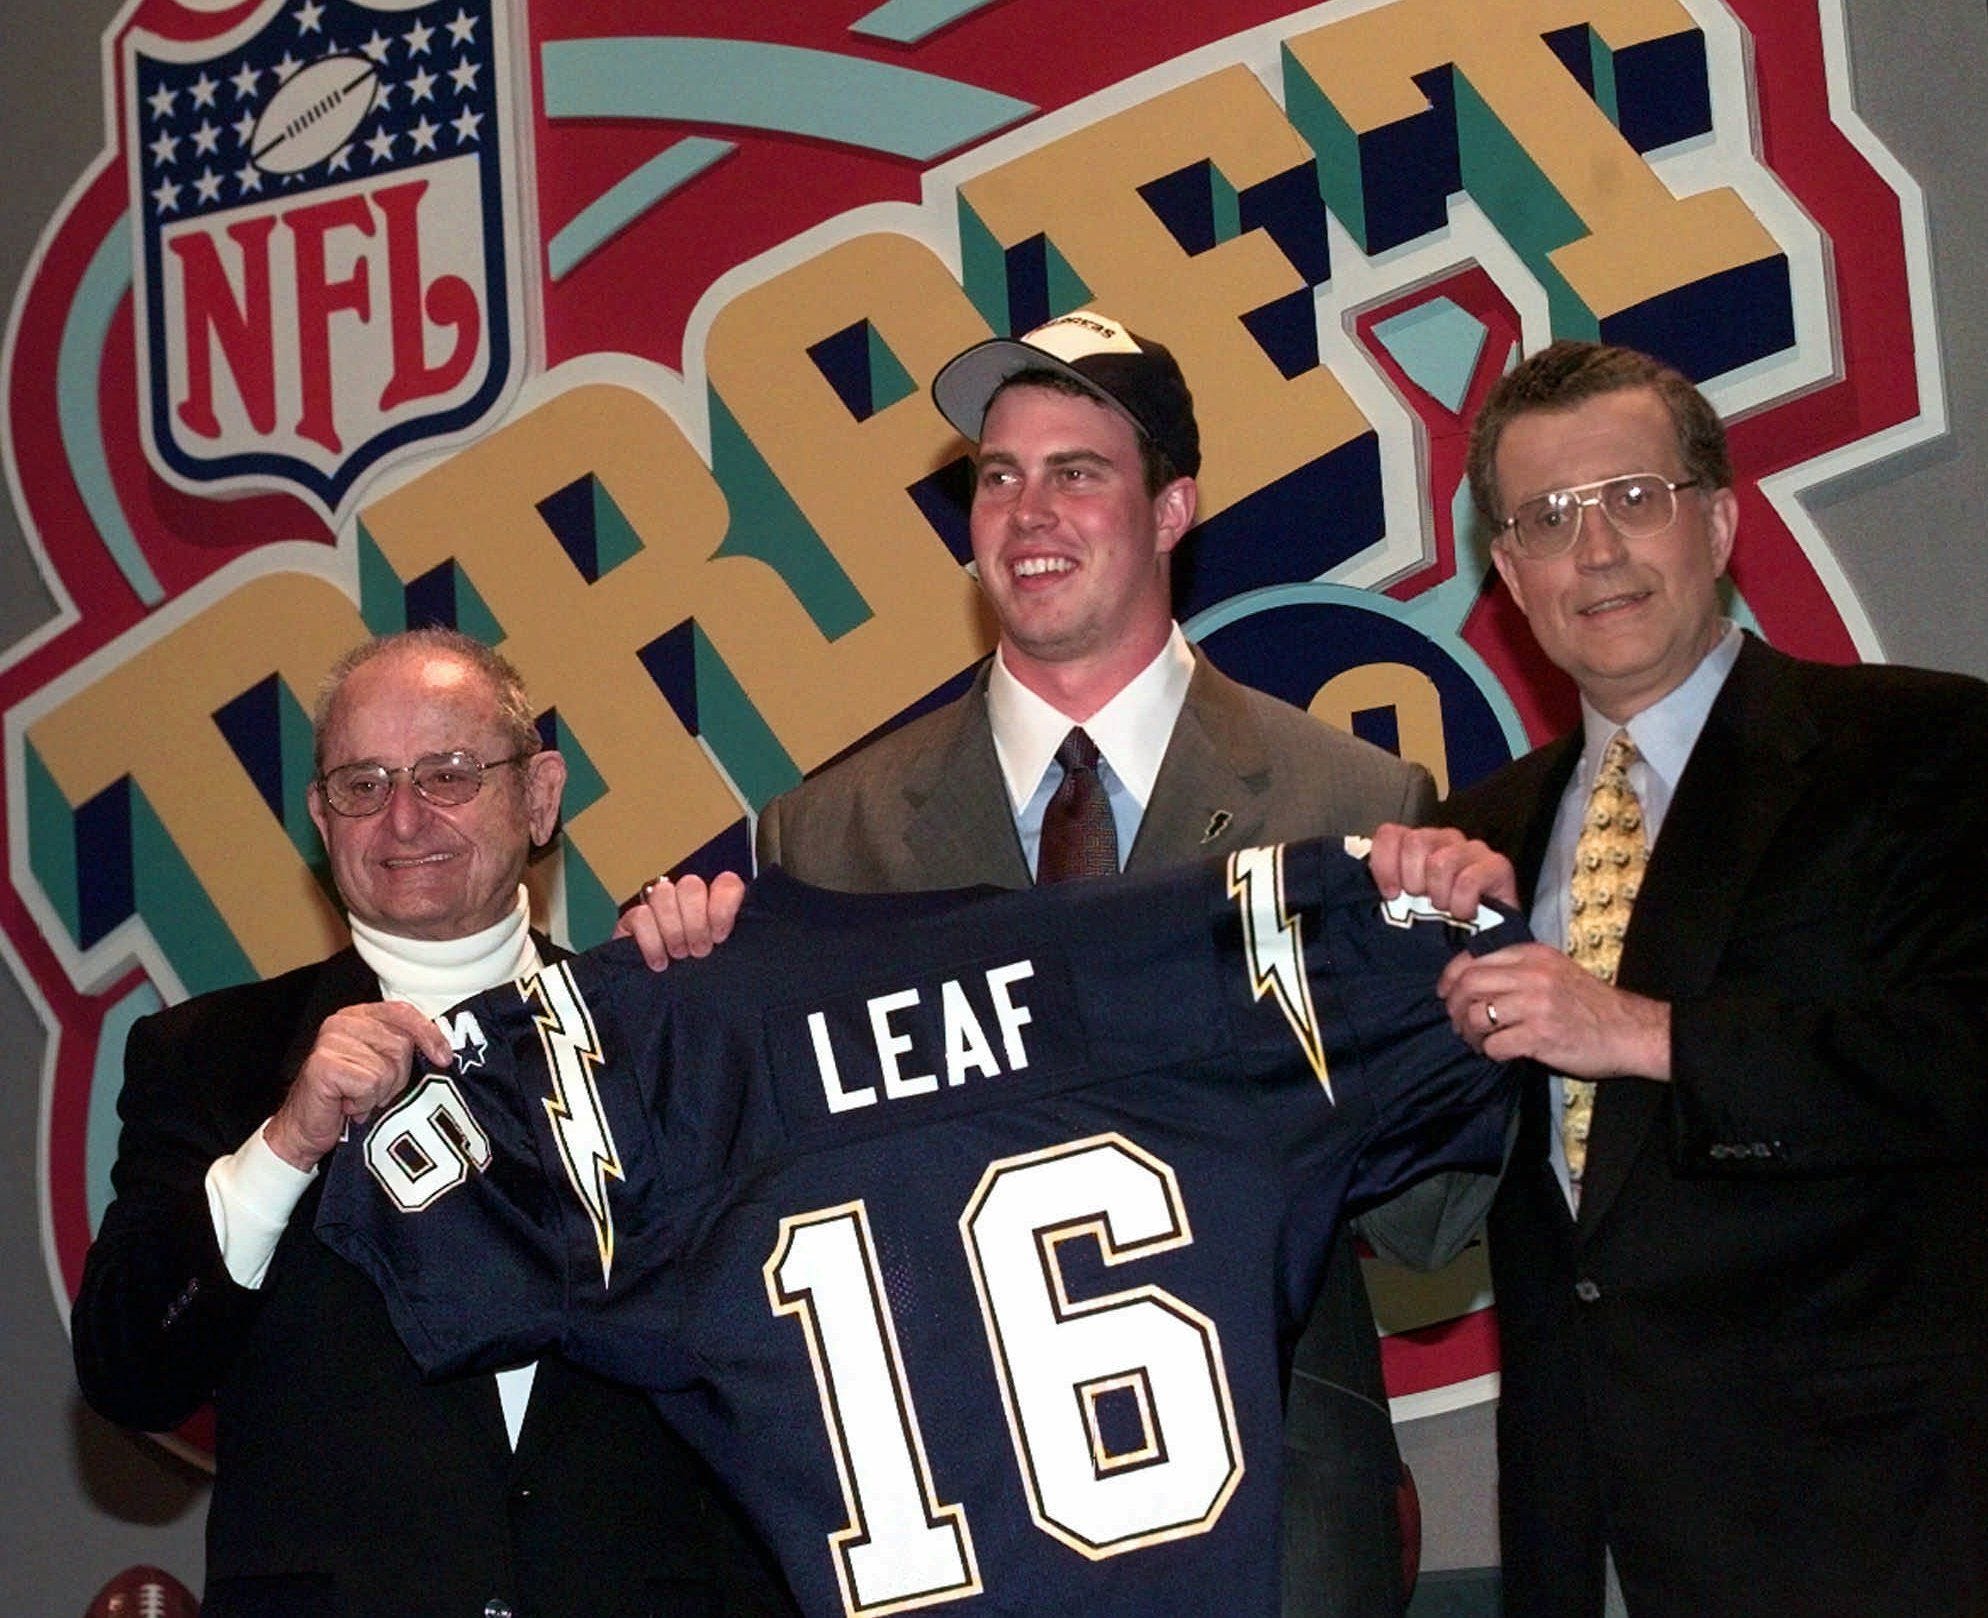 Ryan Leaf: My NFL downfall began at the 1998 Scouting Combine